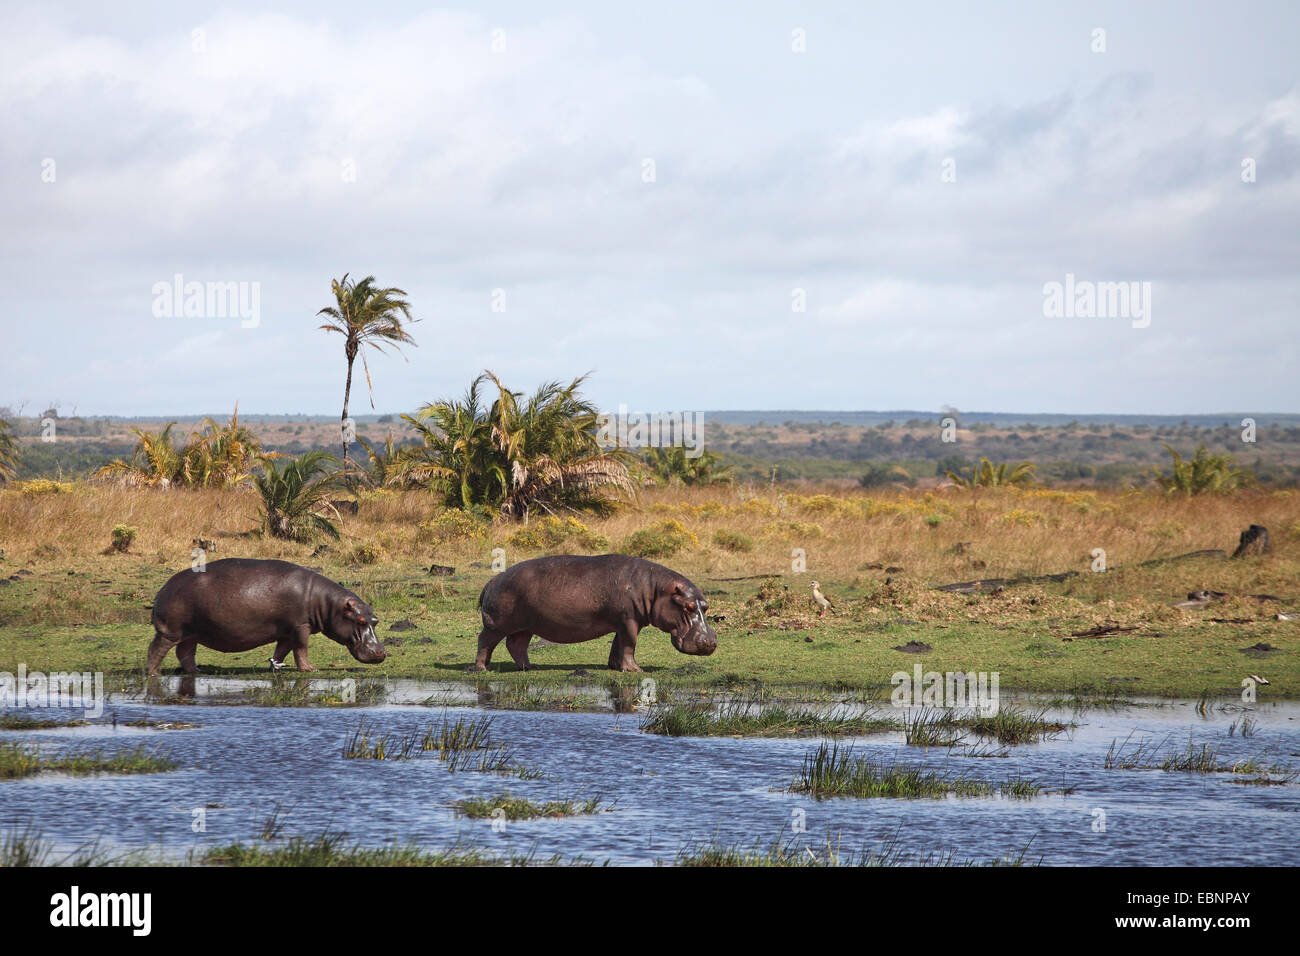 hippopotamus, hippo, Common hippopotamus (Hippopotamus amphibius), two hippos standing at the shore of a lake, South Africa, St. Lucia Stock Photo